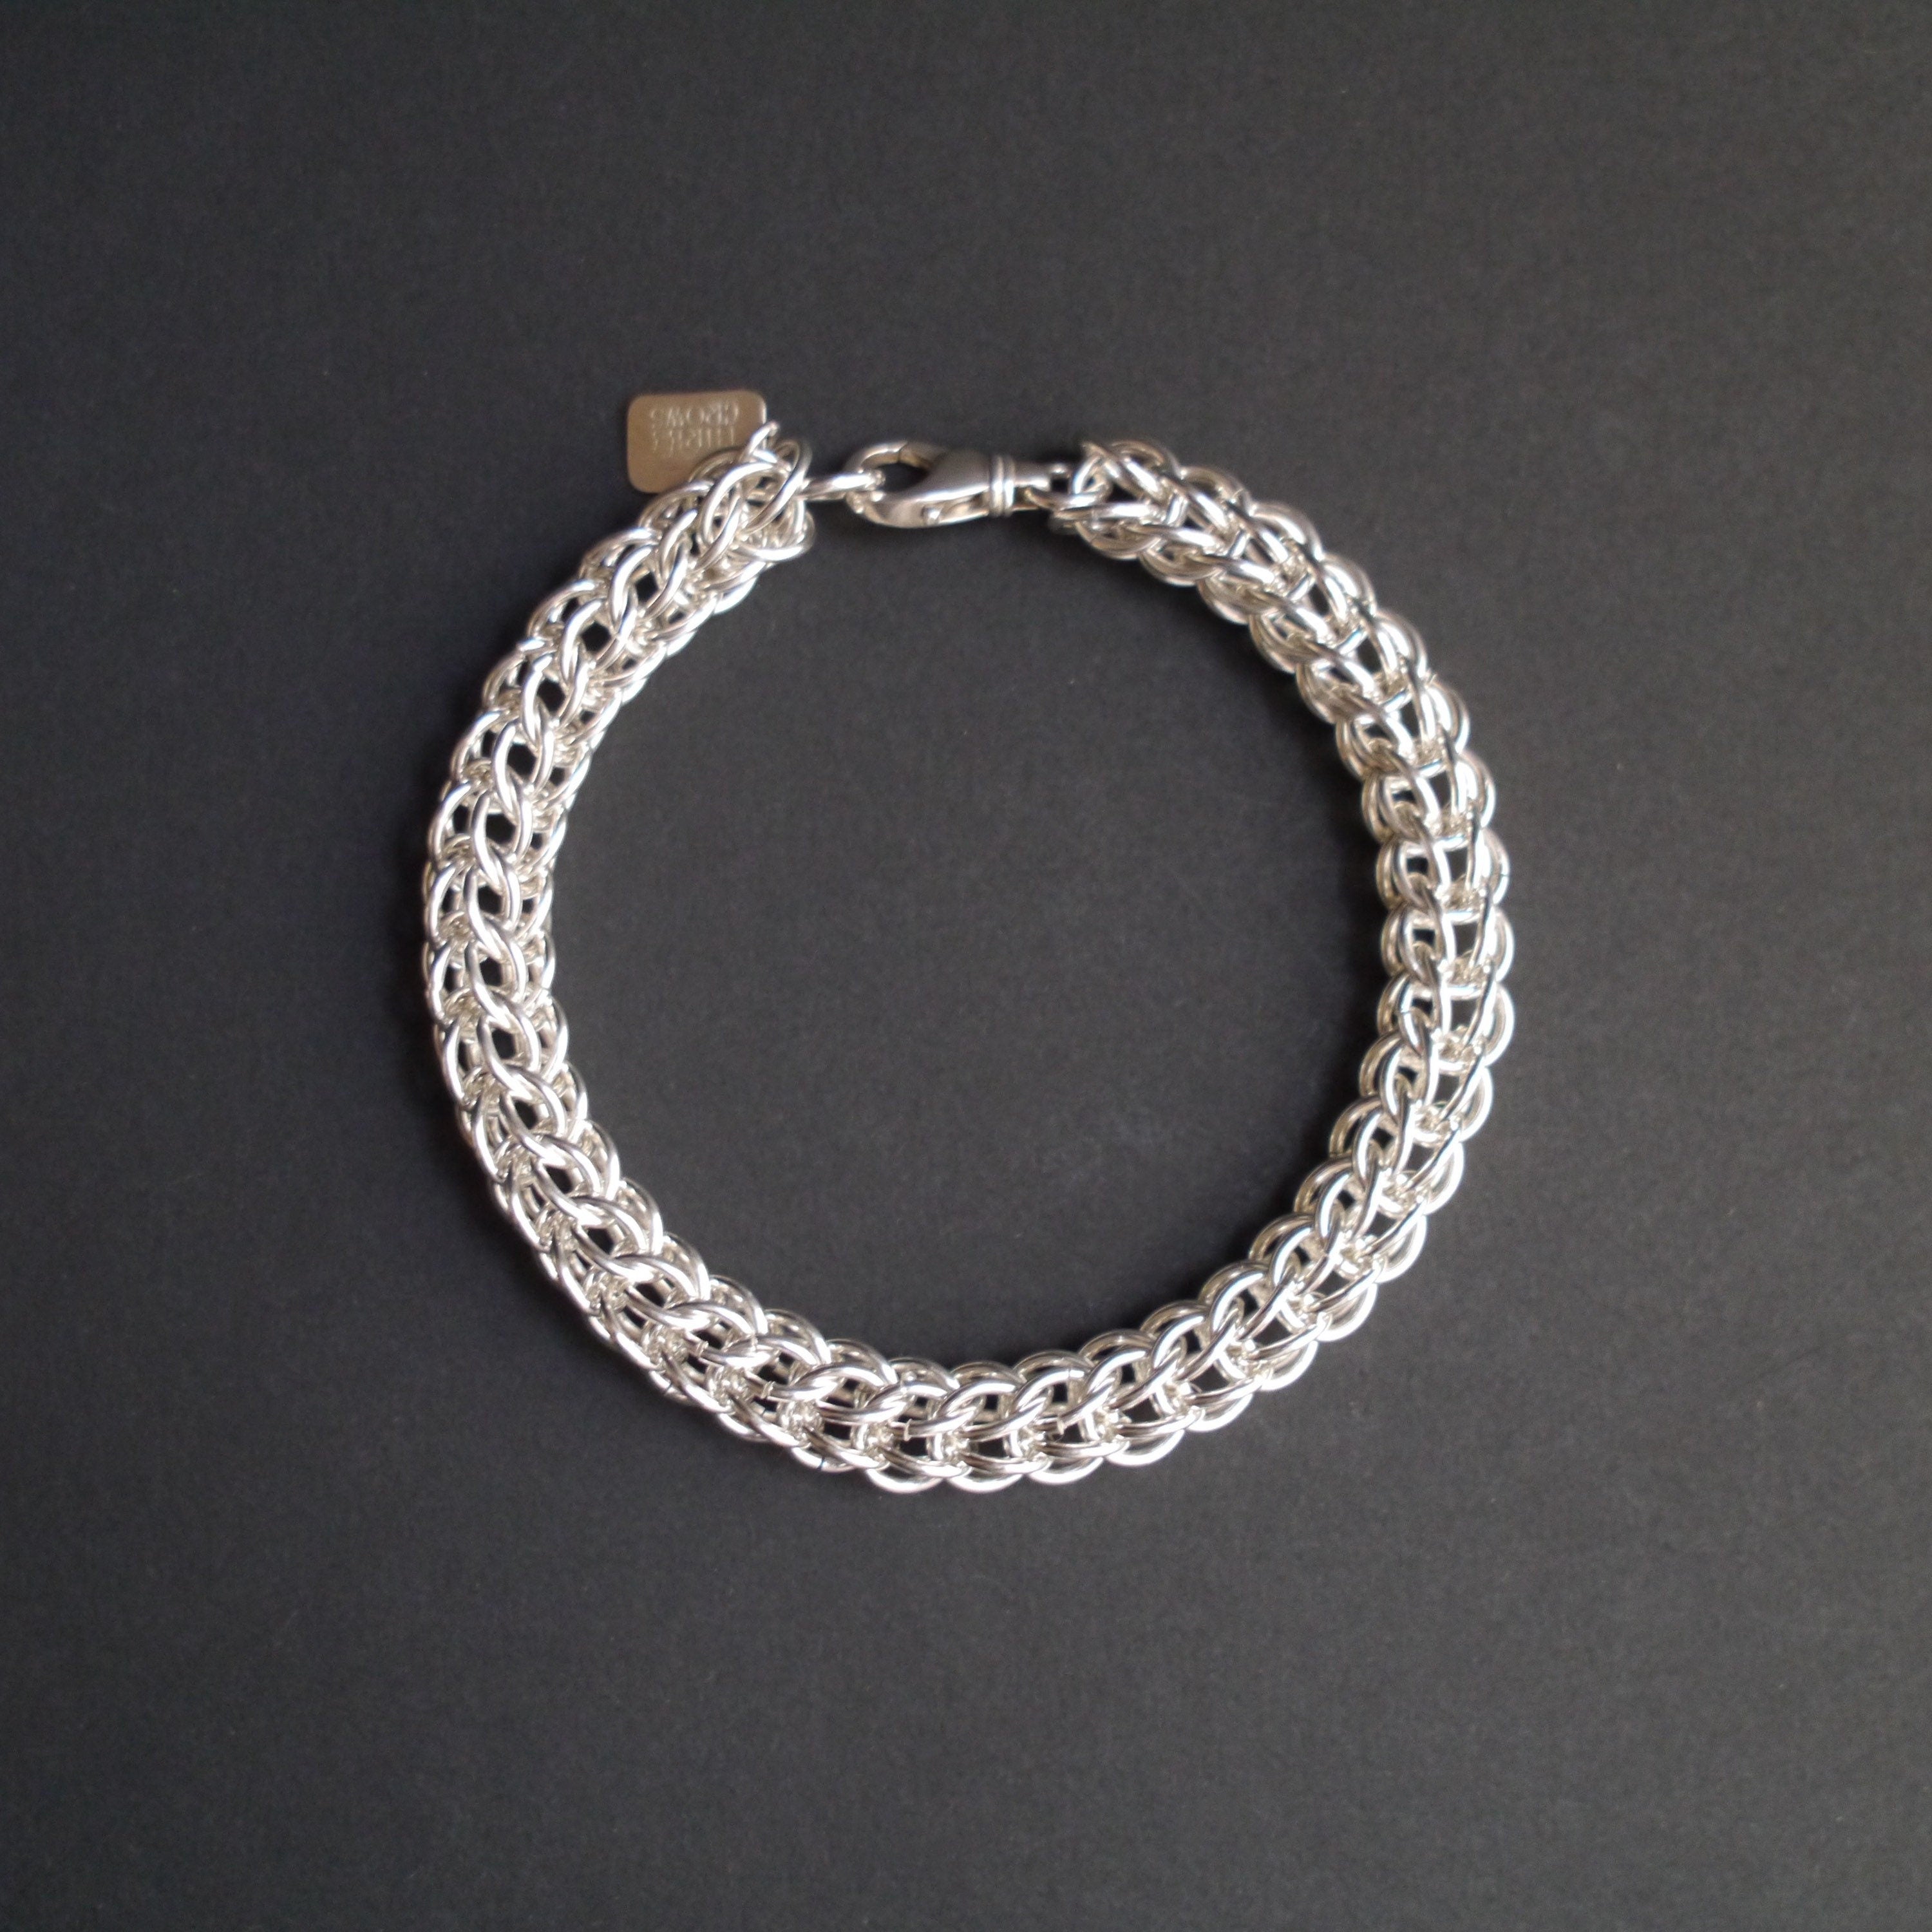 chainmail jewelry necklaces chokersbracelets and more all chainmail  hand work